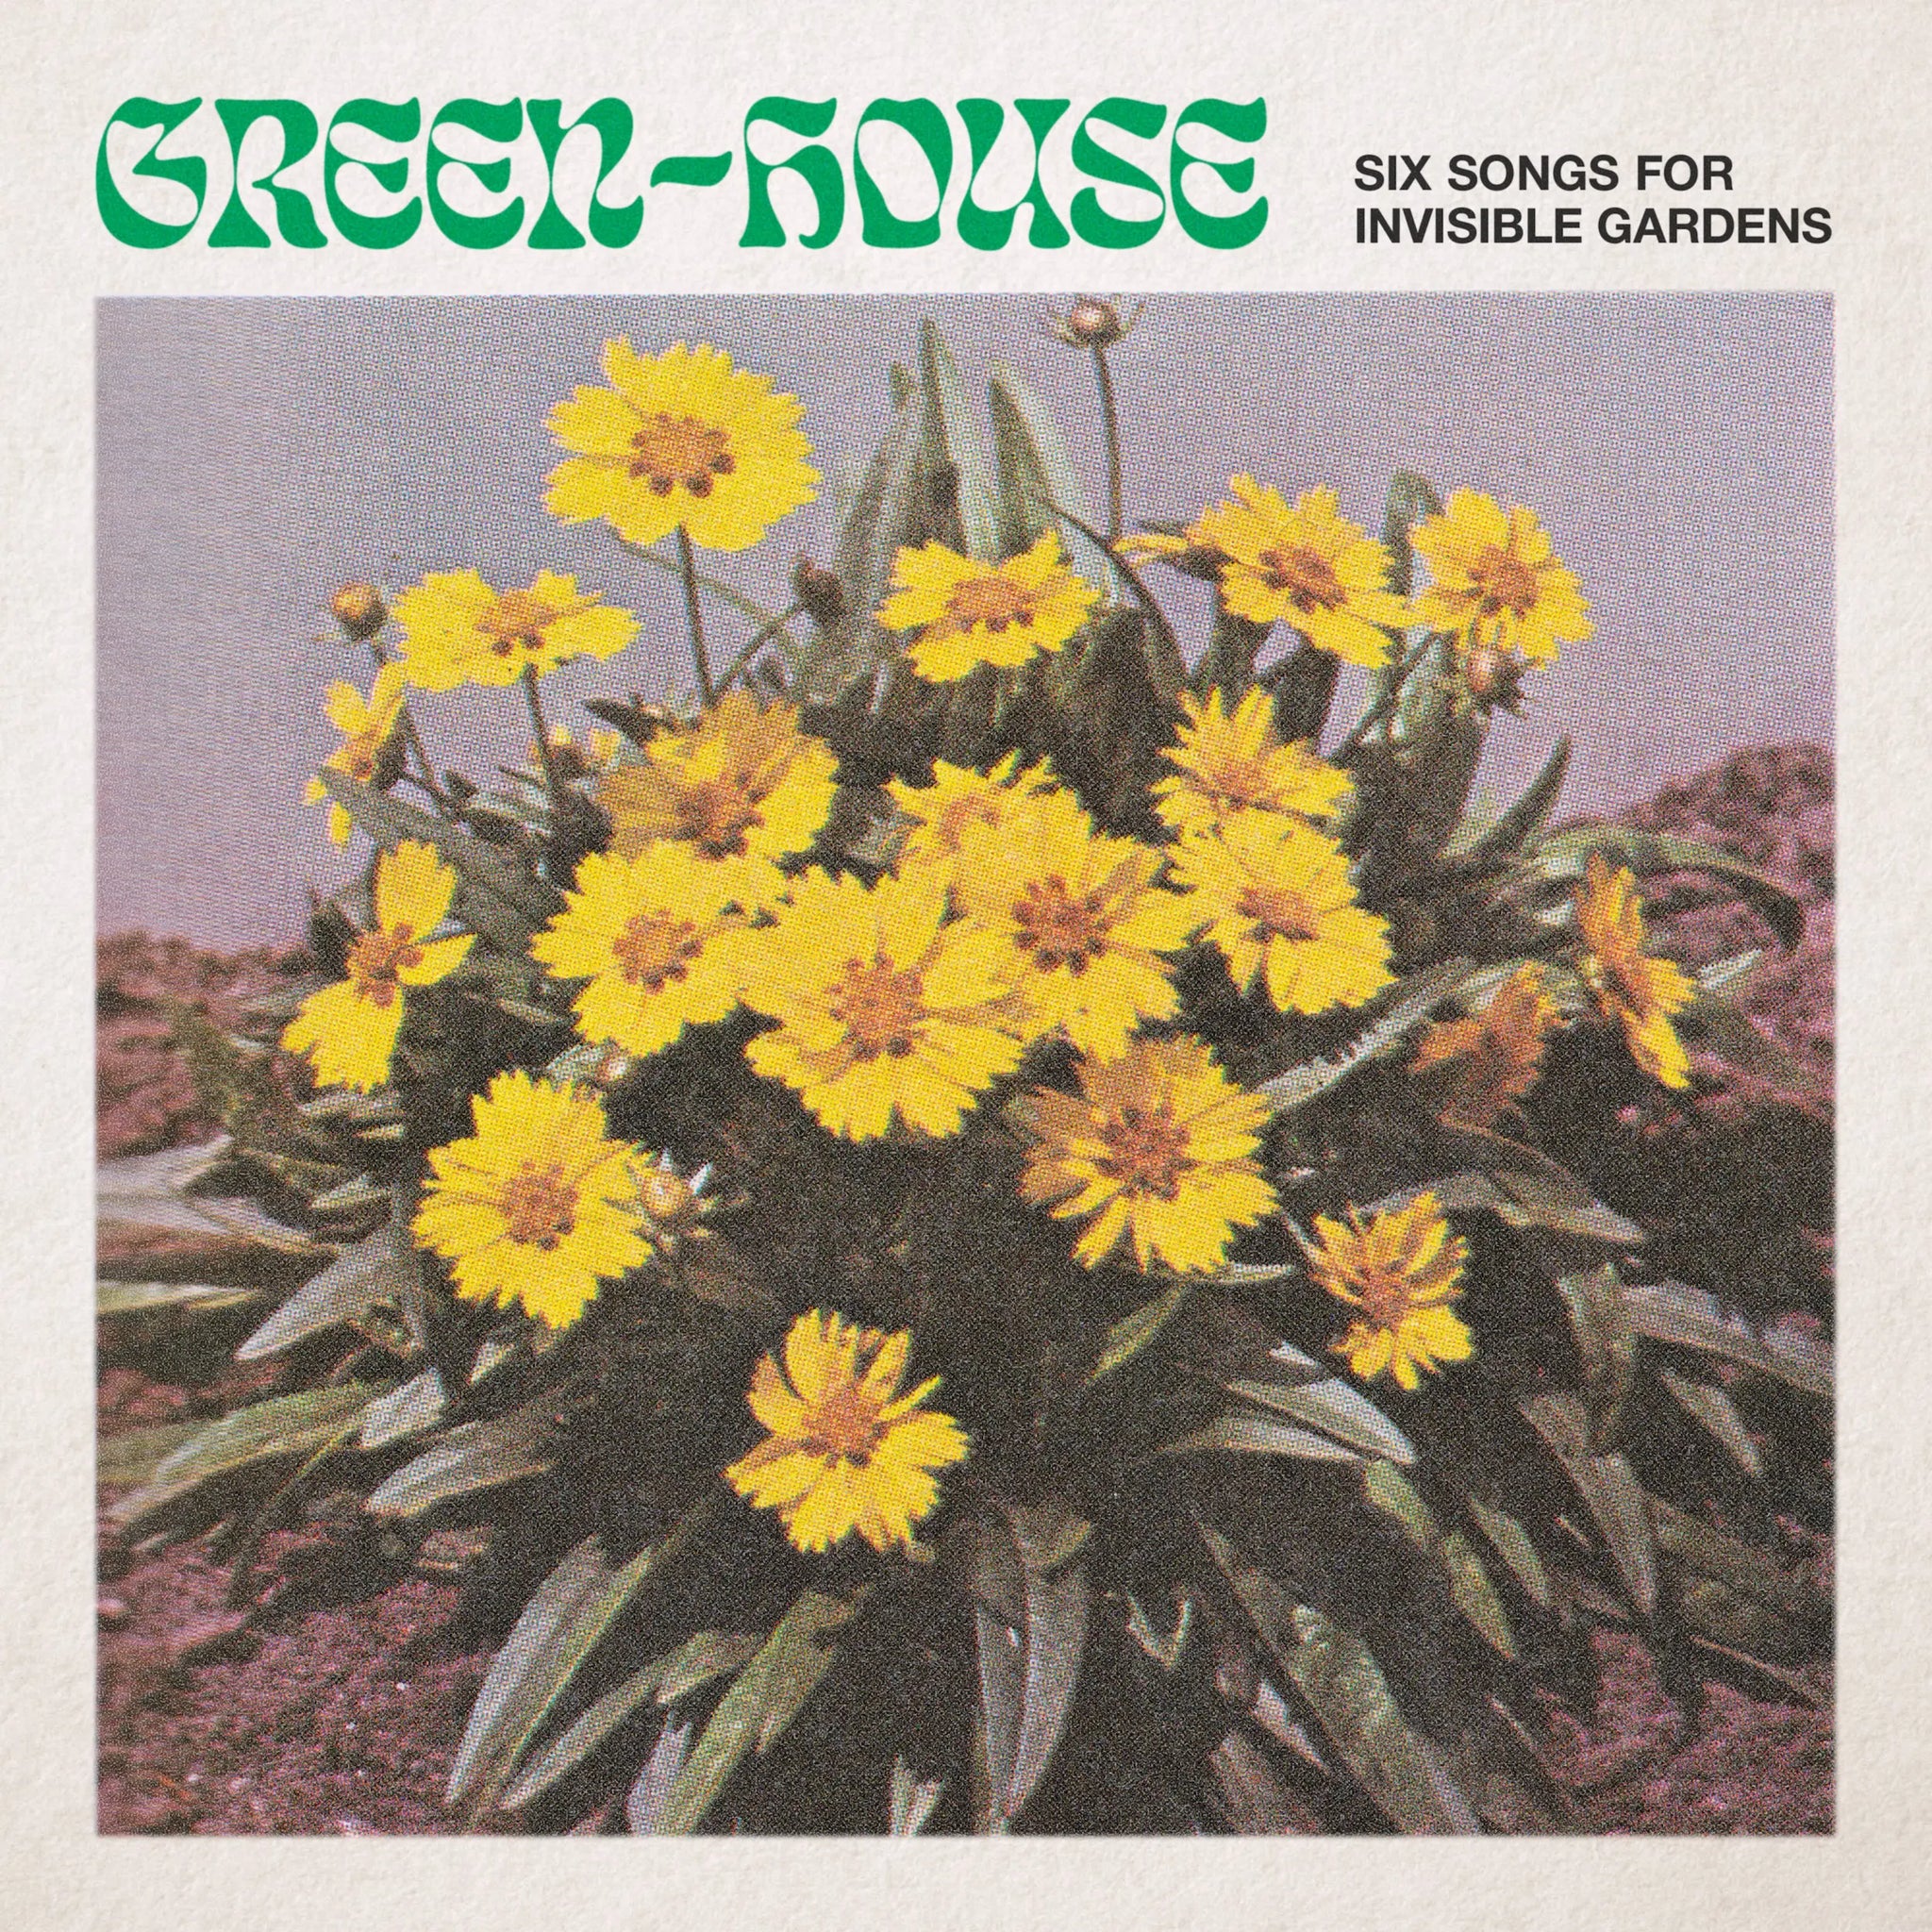 GREEN-HOUSE - SIX SONGS FOR INVISIBLE GARDENS Vinyl 12" EP